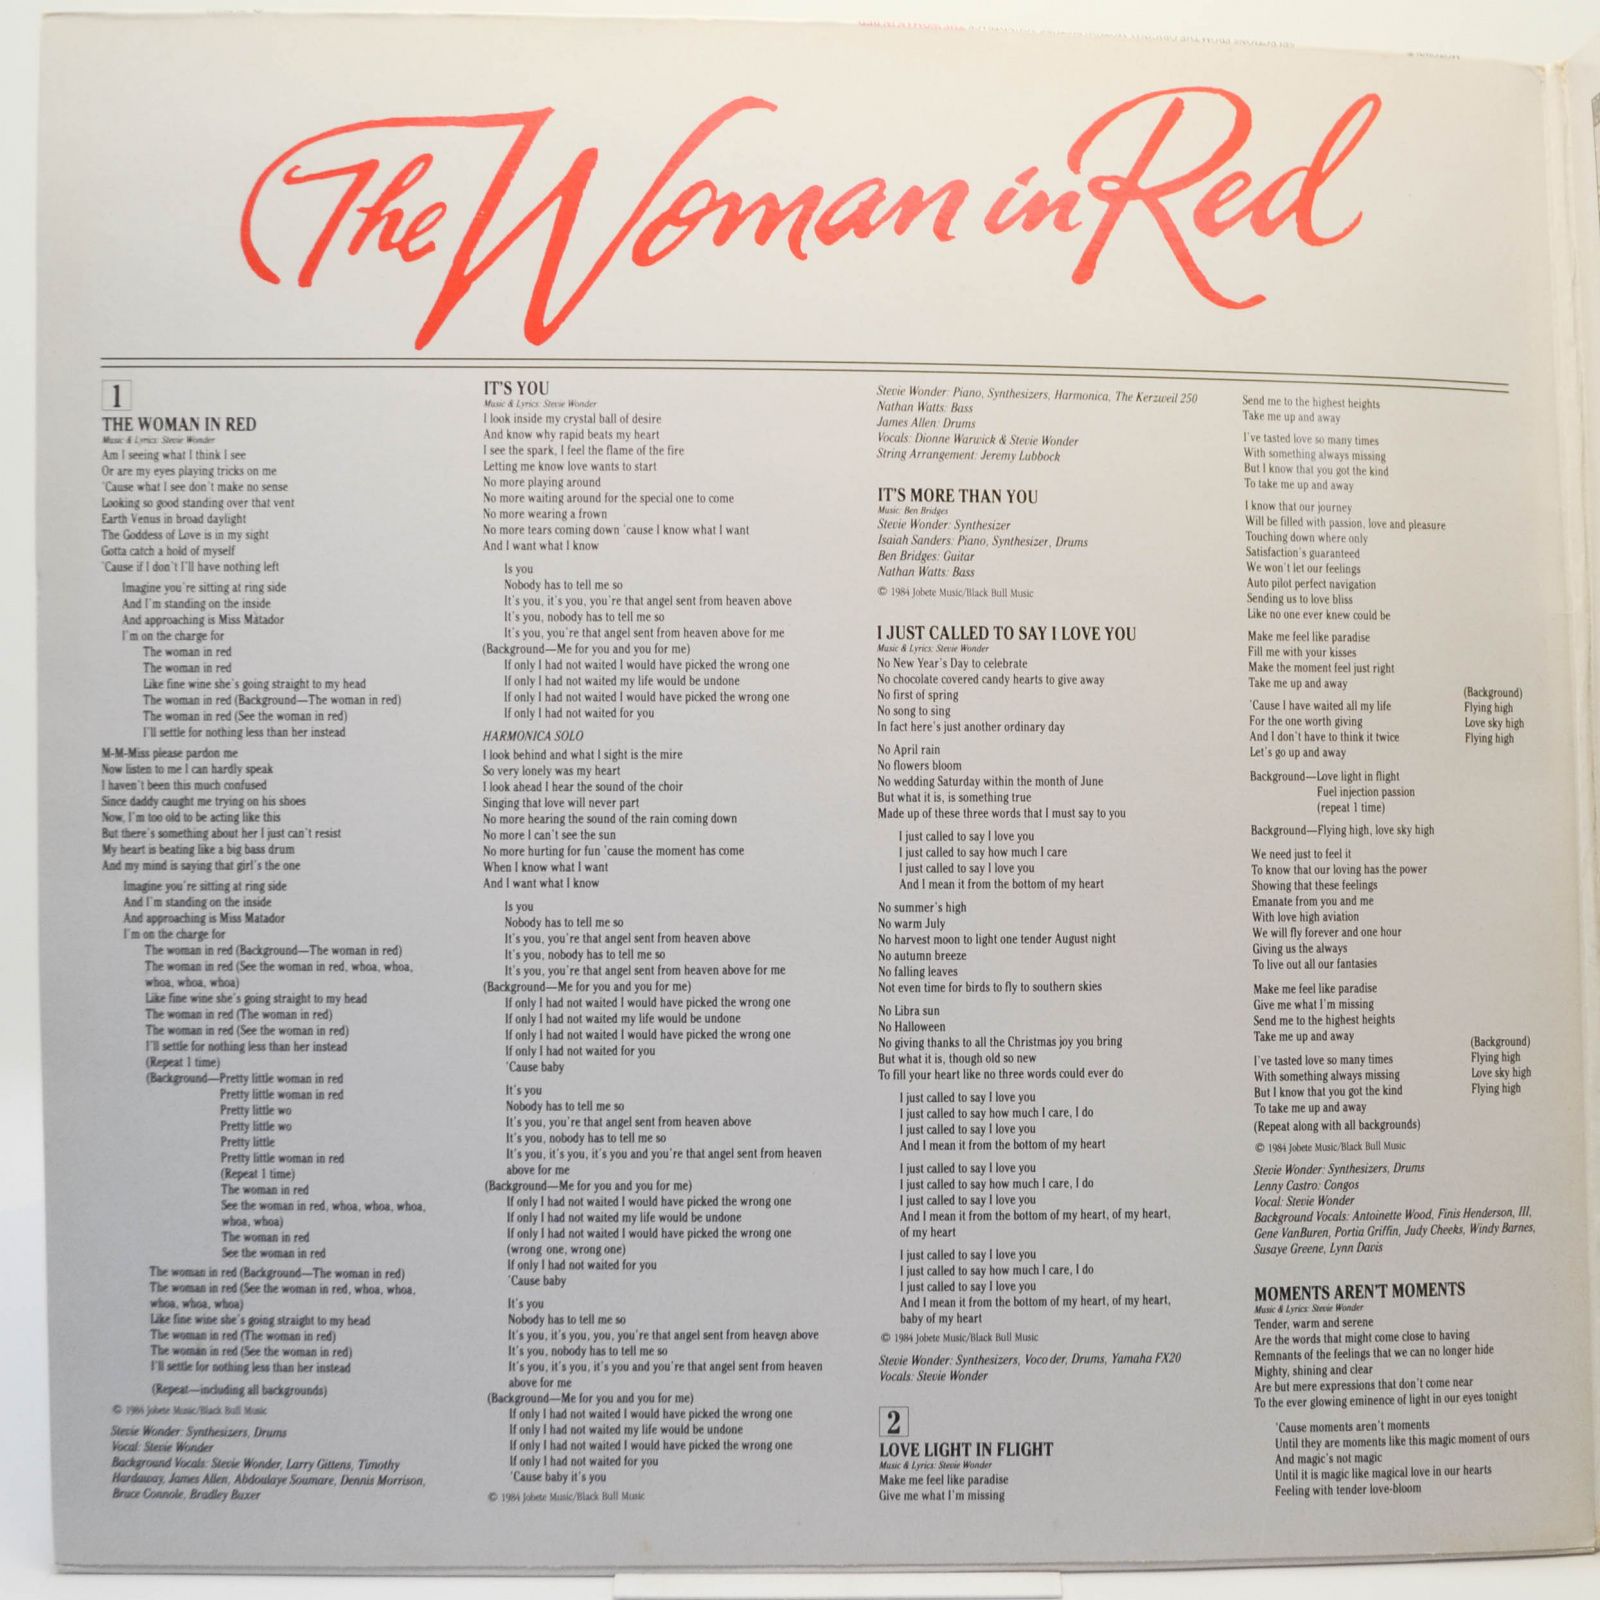 Stevie Wonder — The Woman In Red (Selections From The Original Motion Picture Soundtrack), 1984